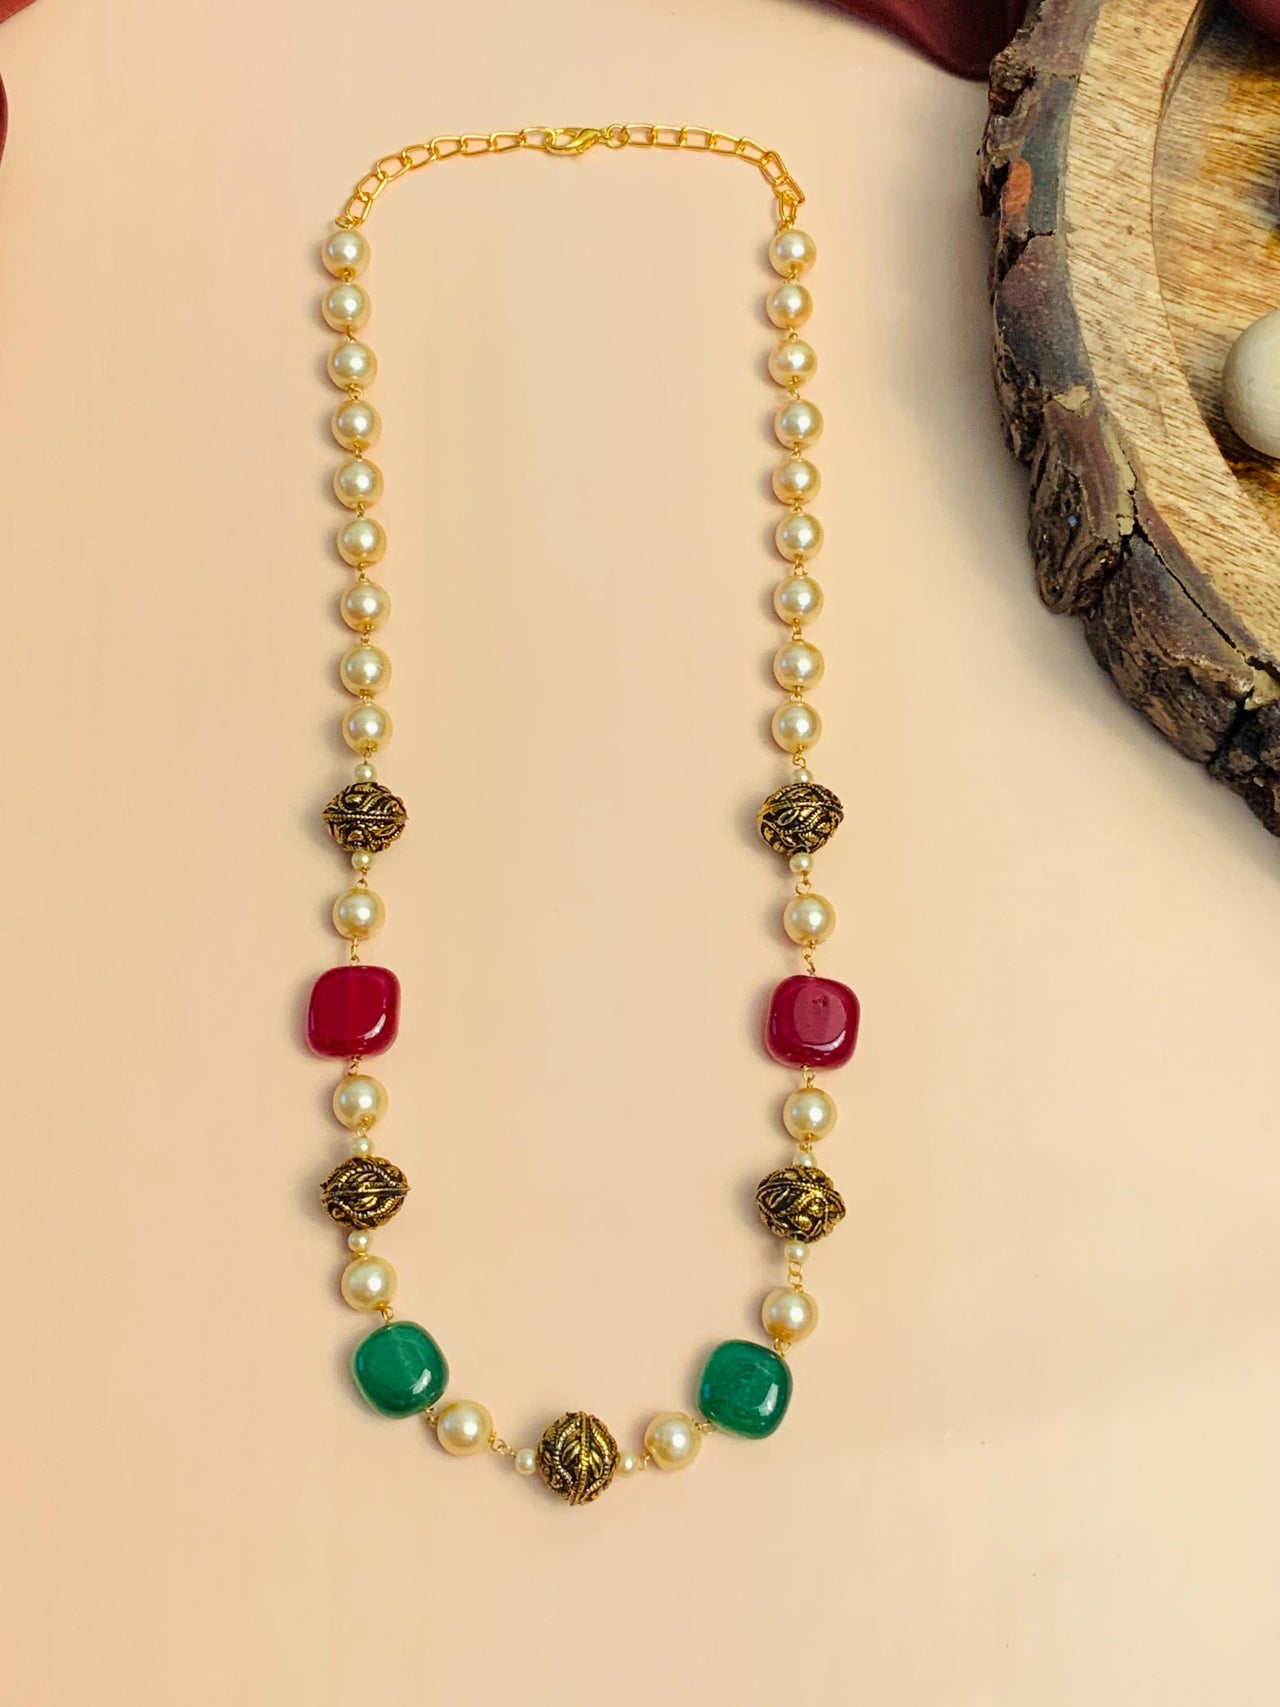 Charming High Quality Natural Stones and Pearl Mala